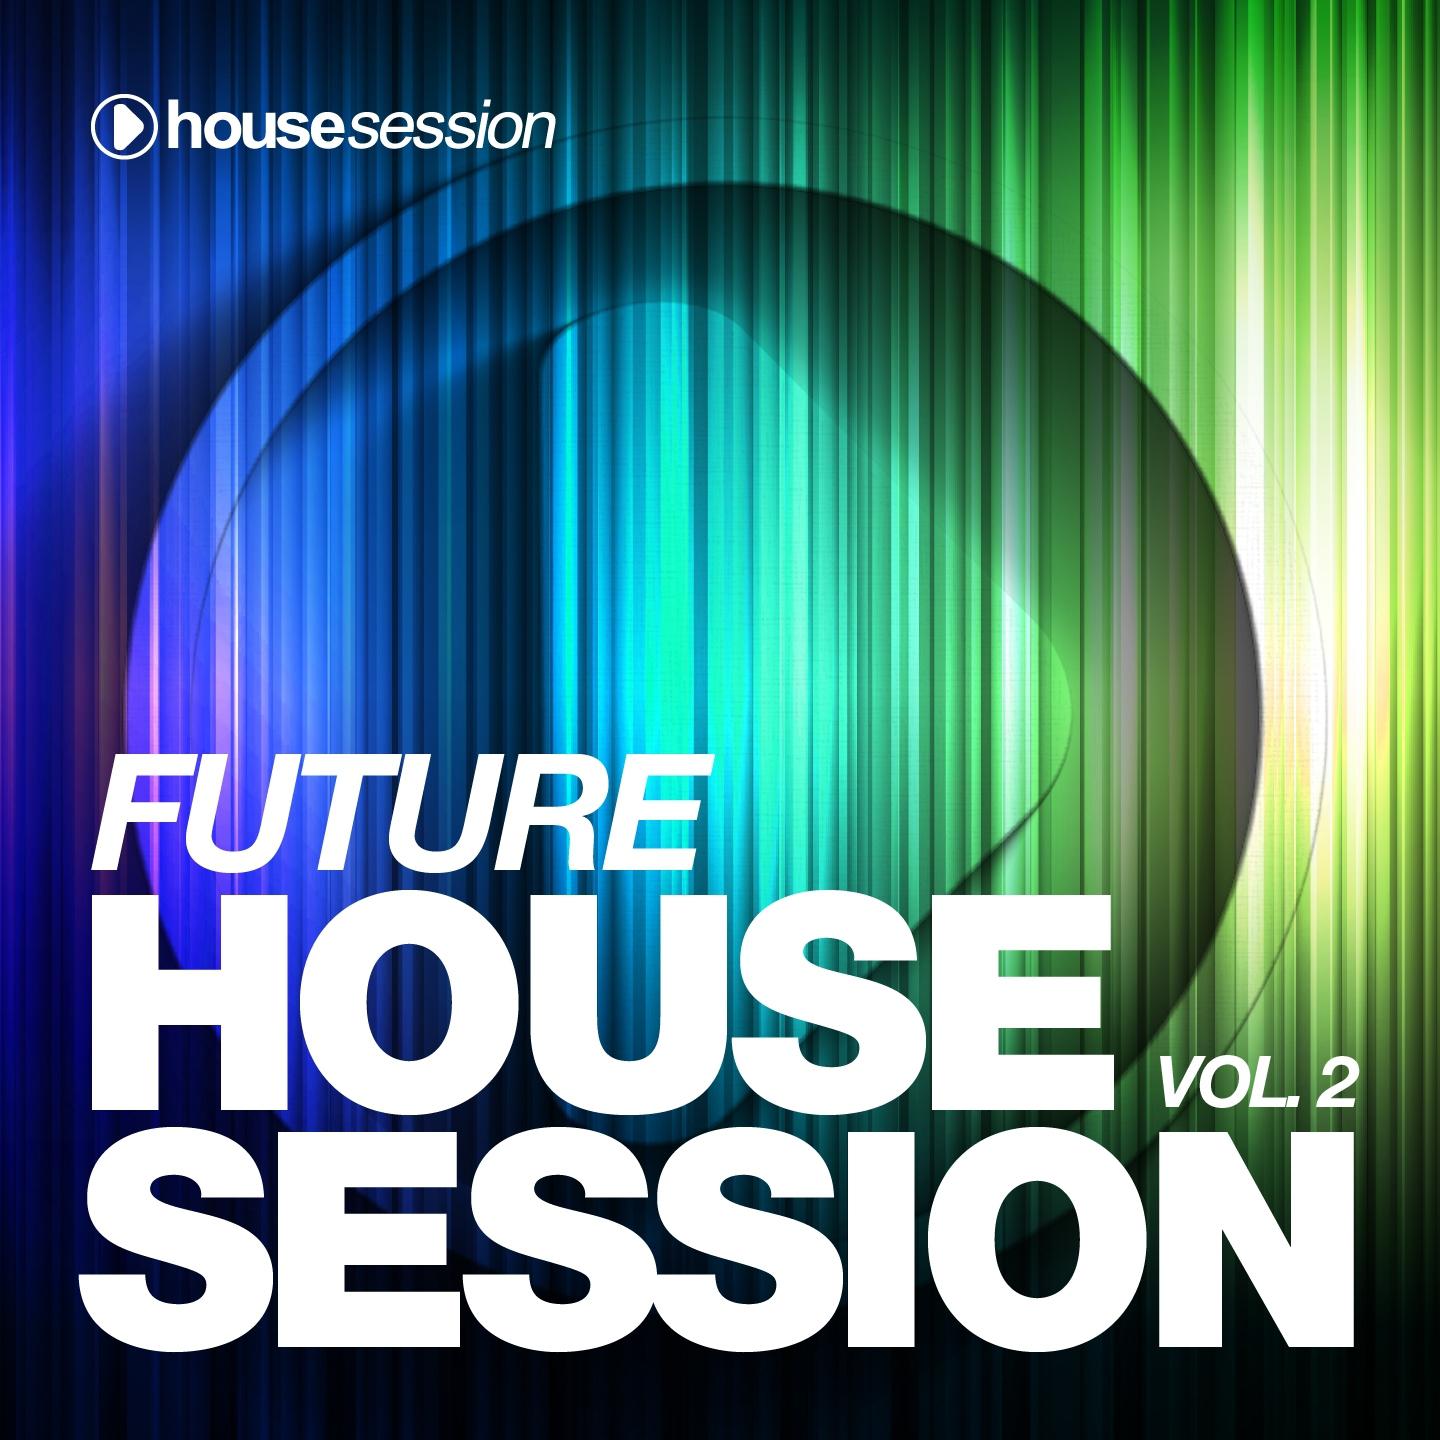 Future Housesession, Vol. 2